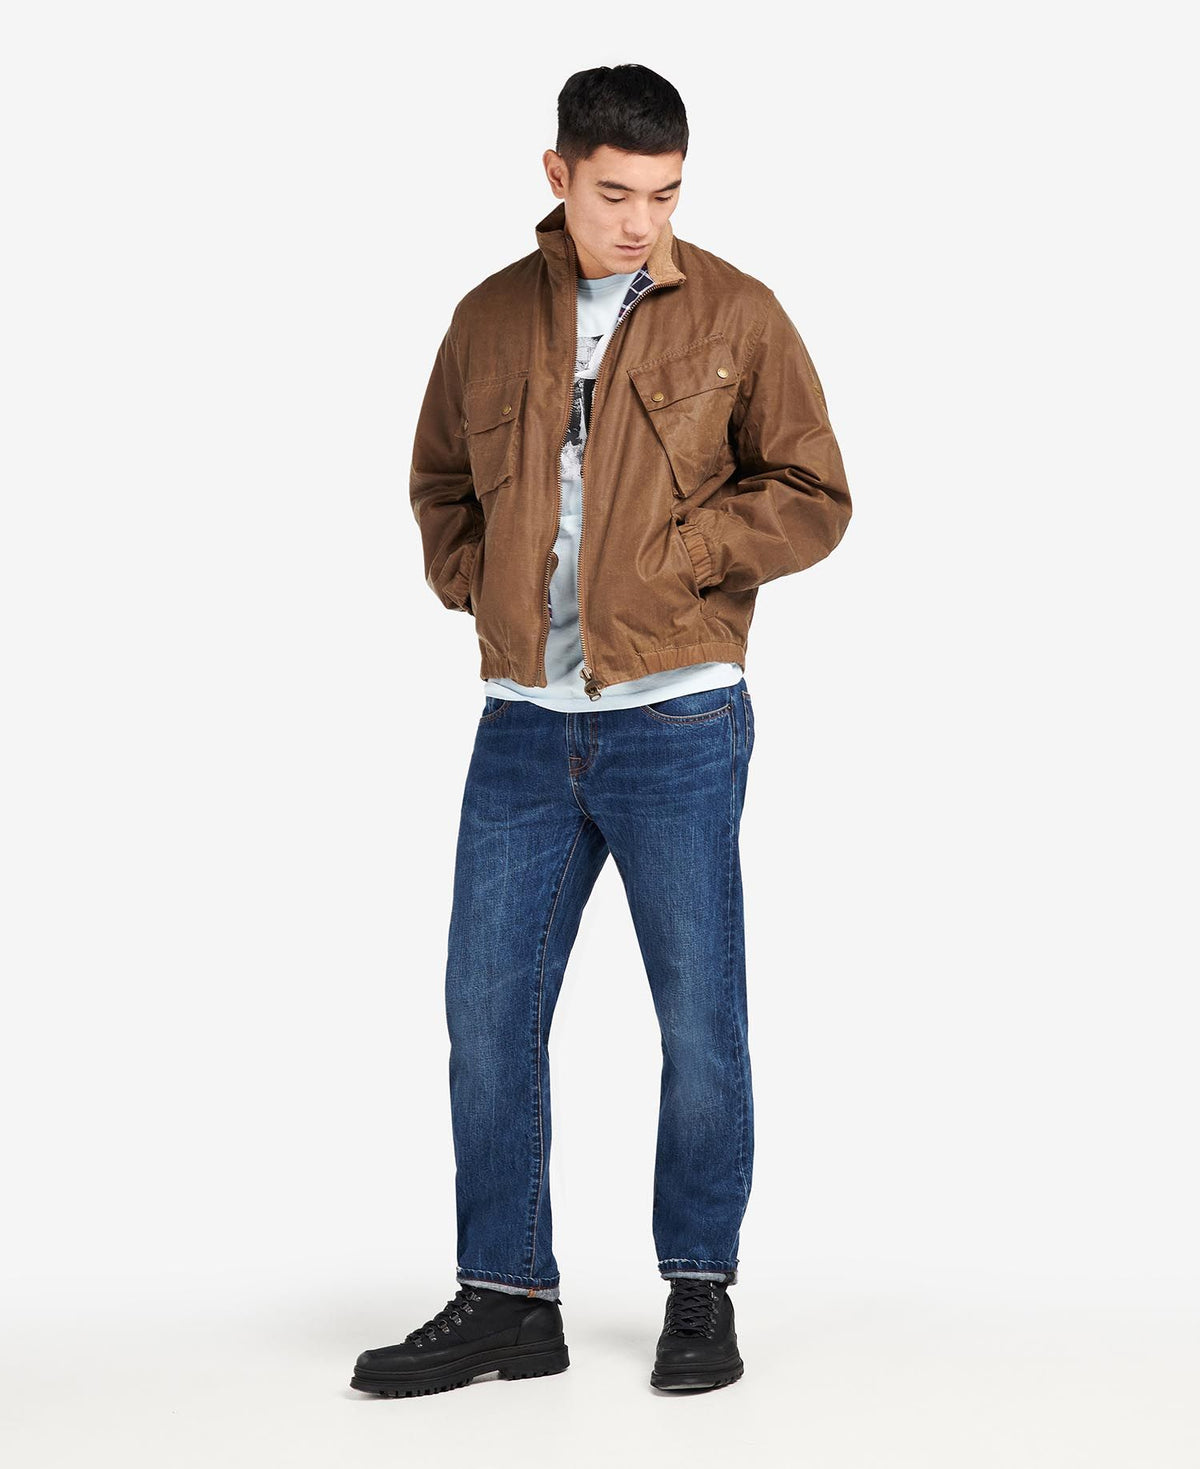 Barbour International SMQ Roslin Jacket - Sand | Spiders Whitby